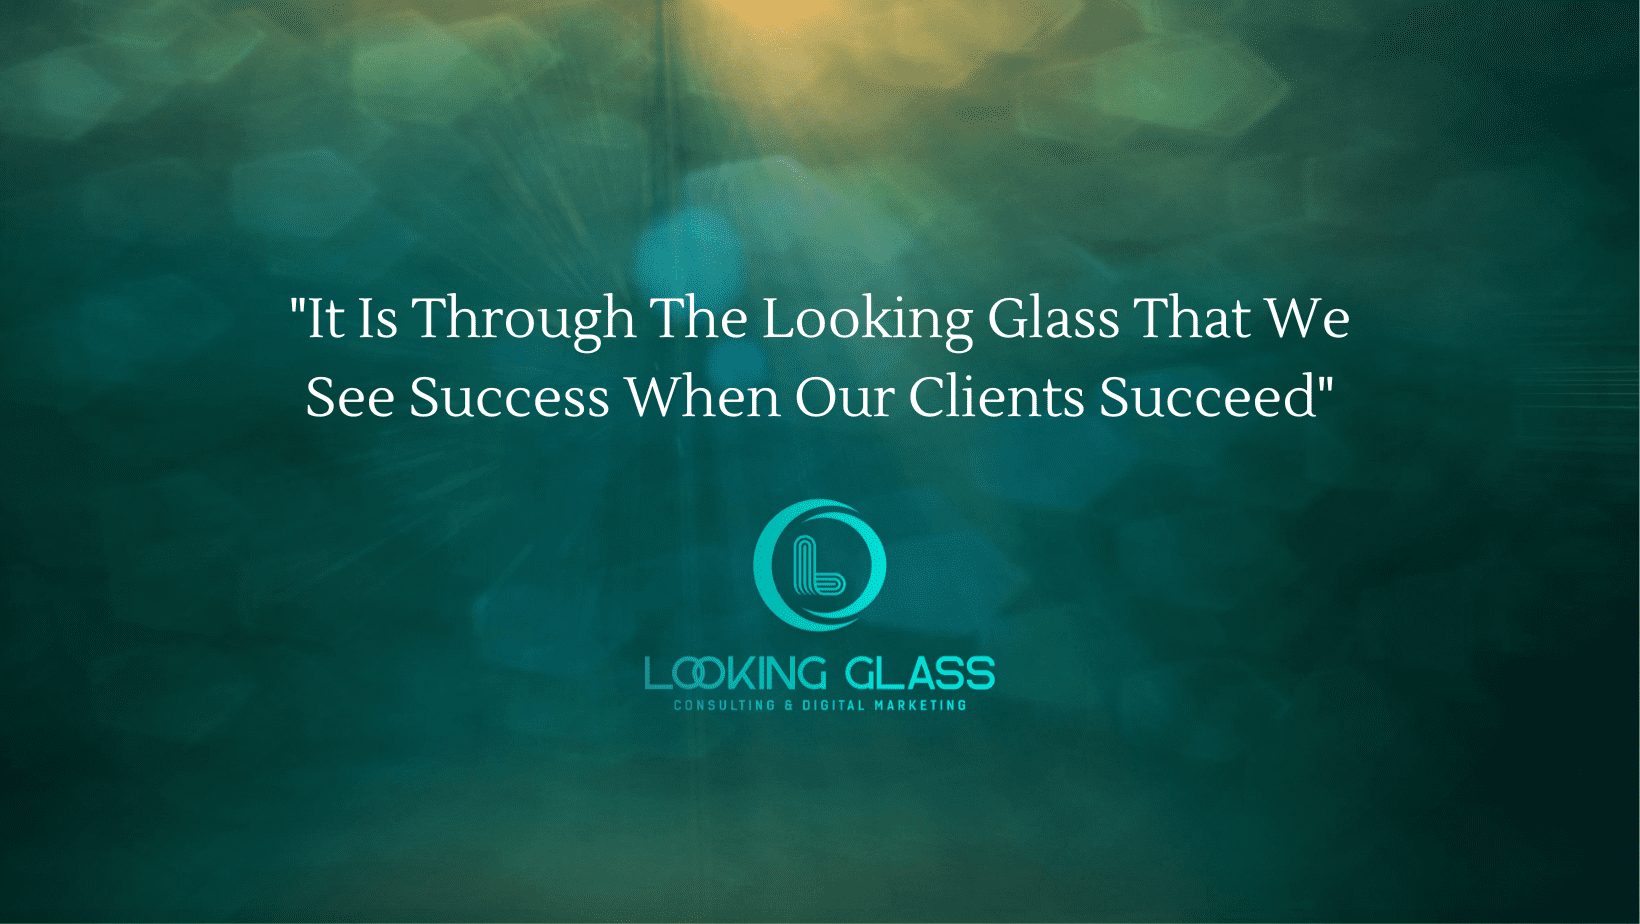 "it is through the looking glass that we see success when our clients succeed.